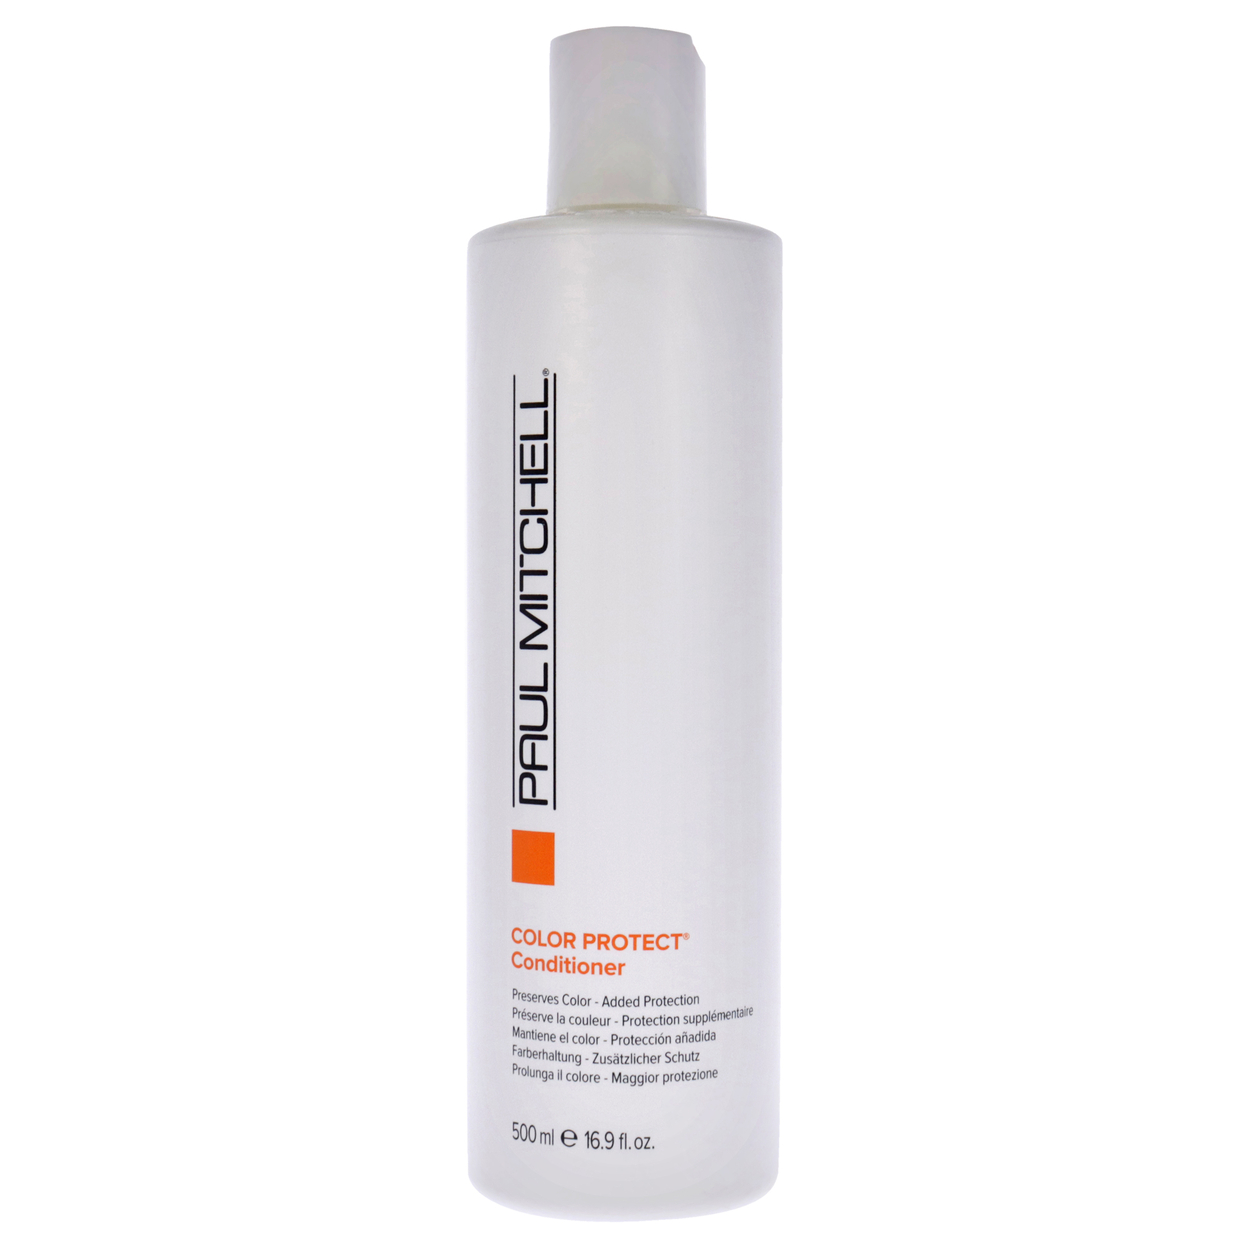 Paul Mitchell Color Protect Conditioner 16.9 Oz